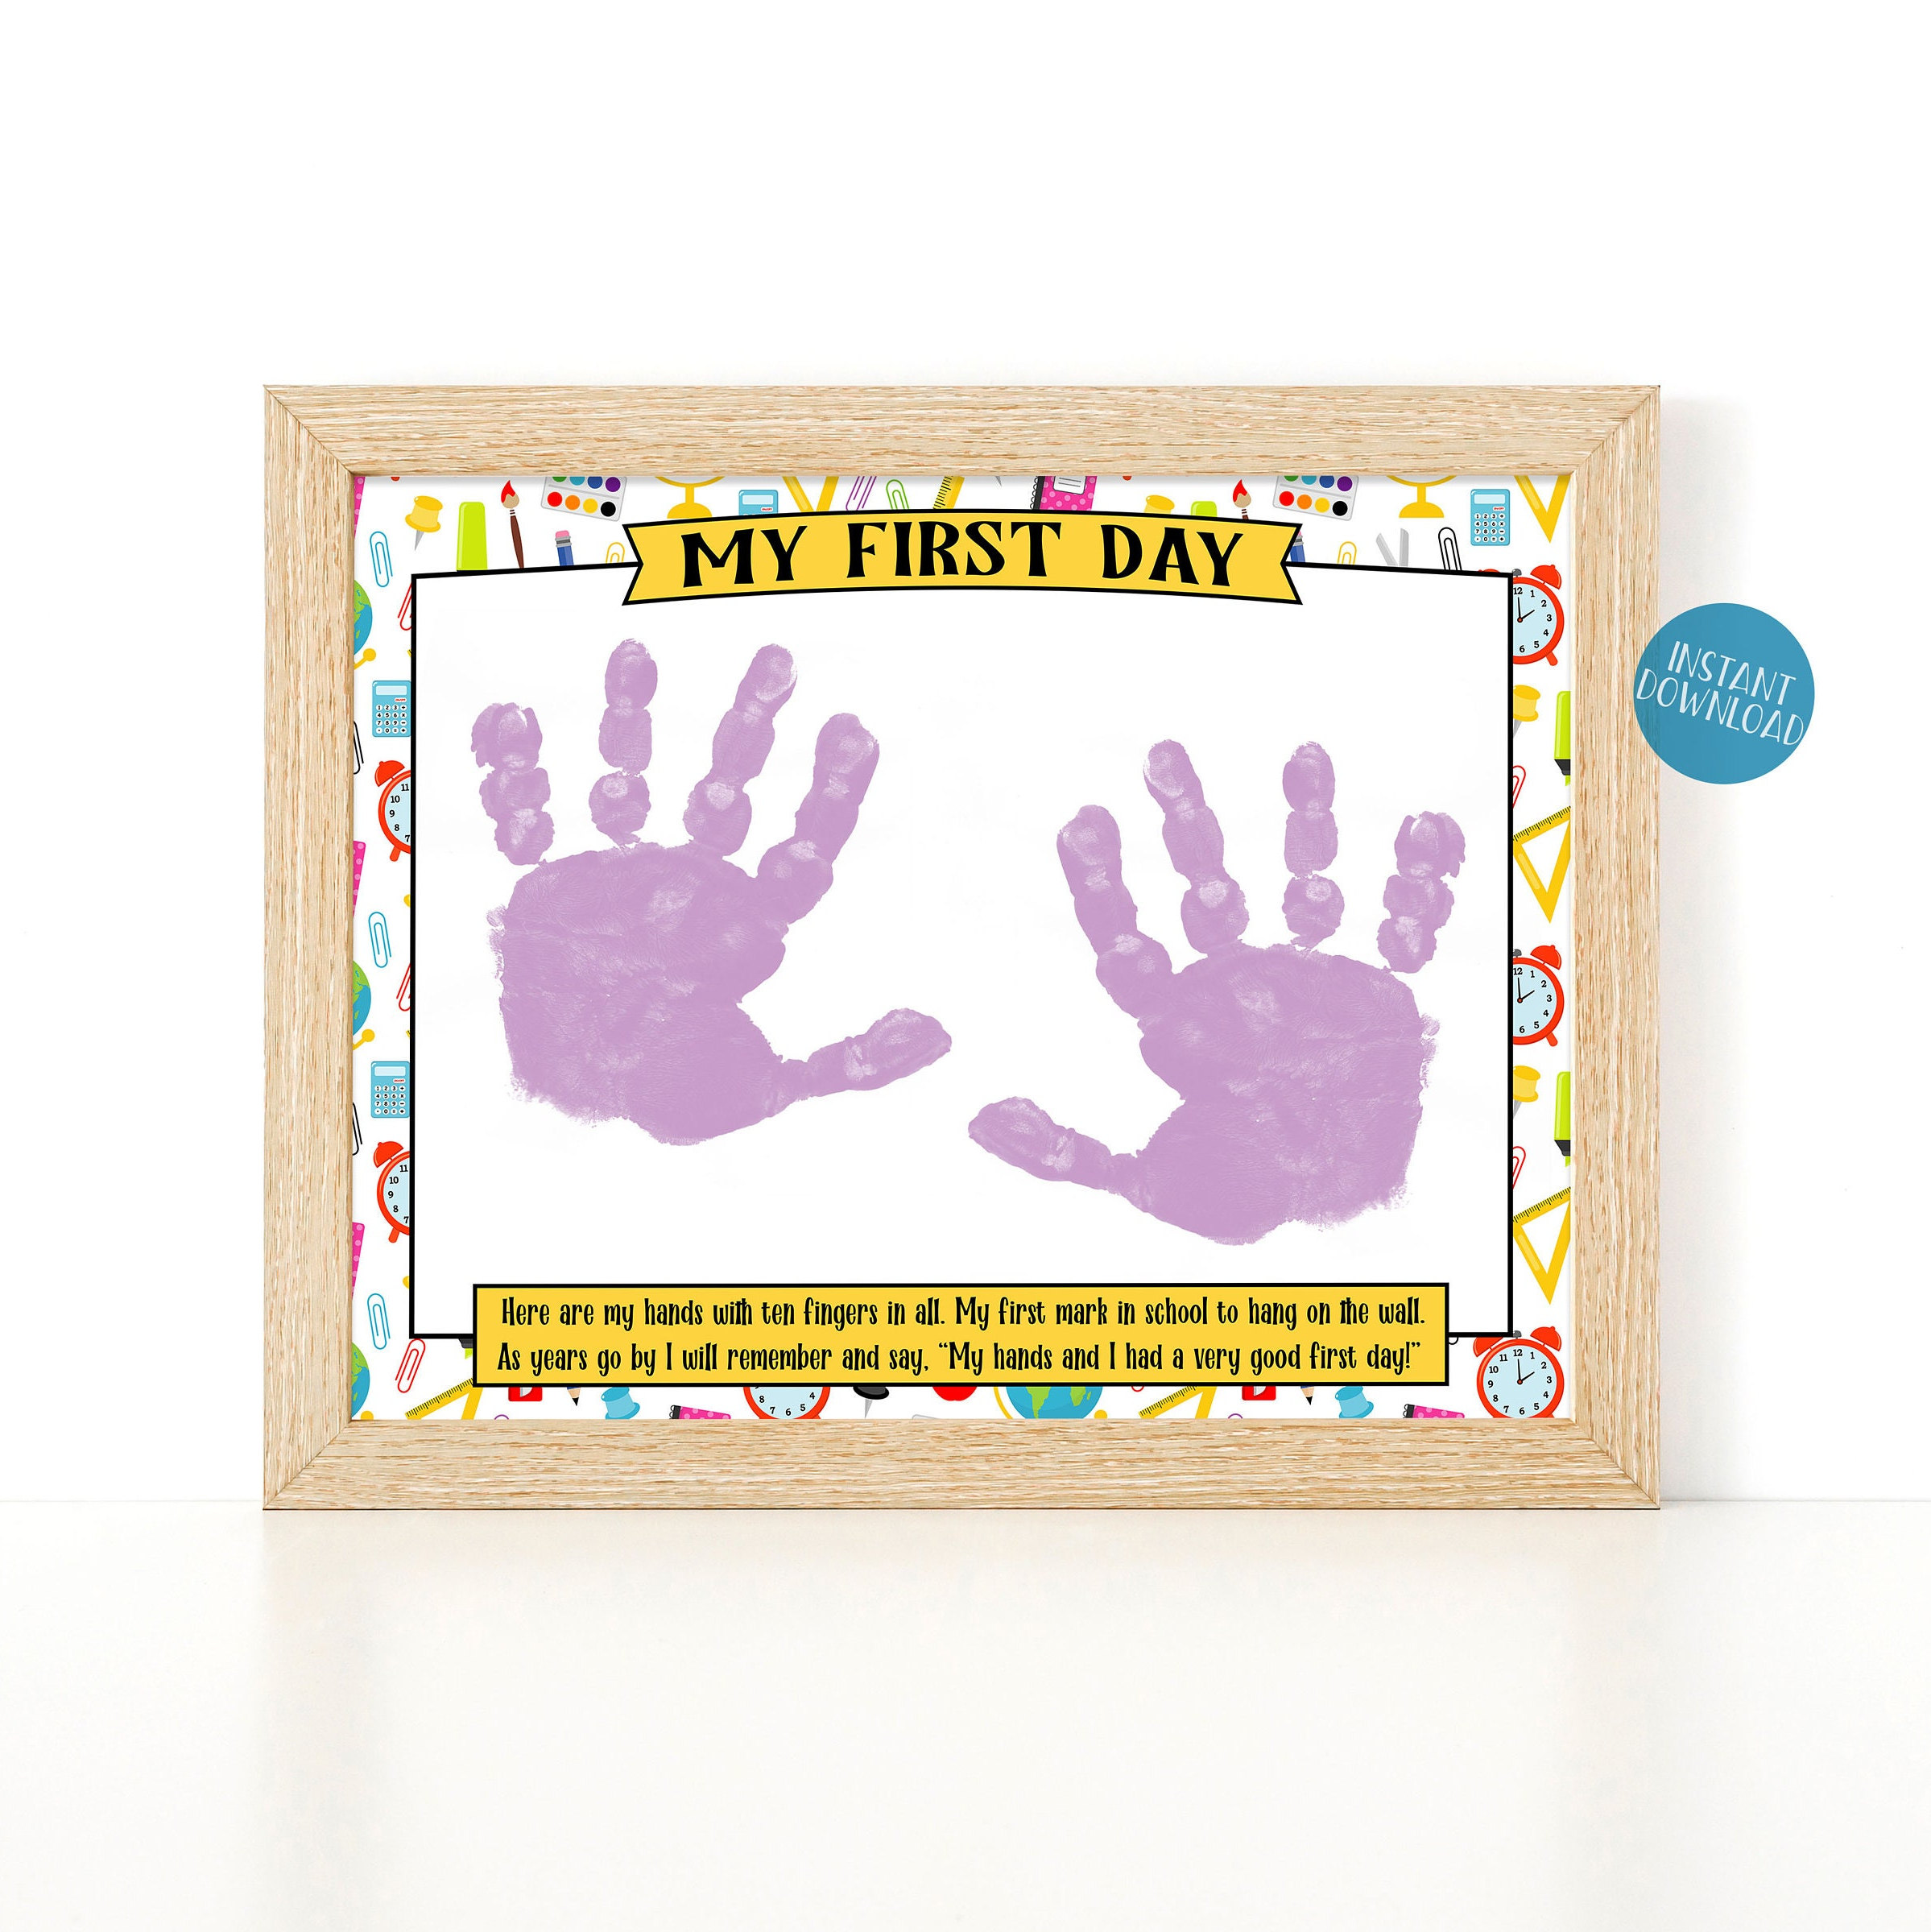 53 Fun Handprint Crafts For Kids [Free Templates] - Simple